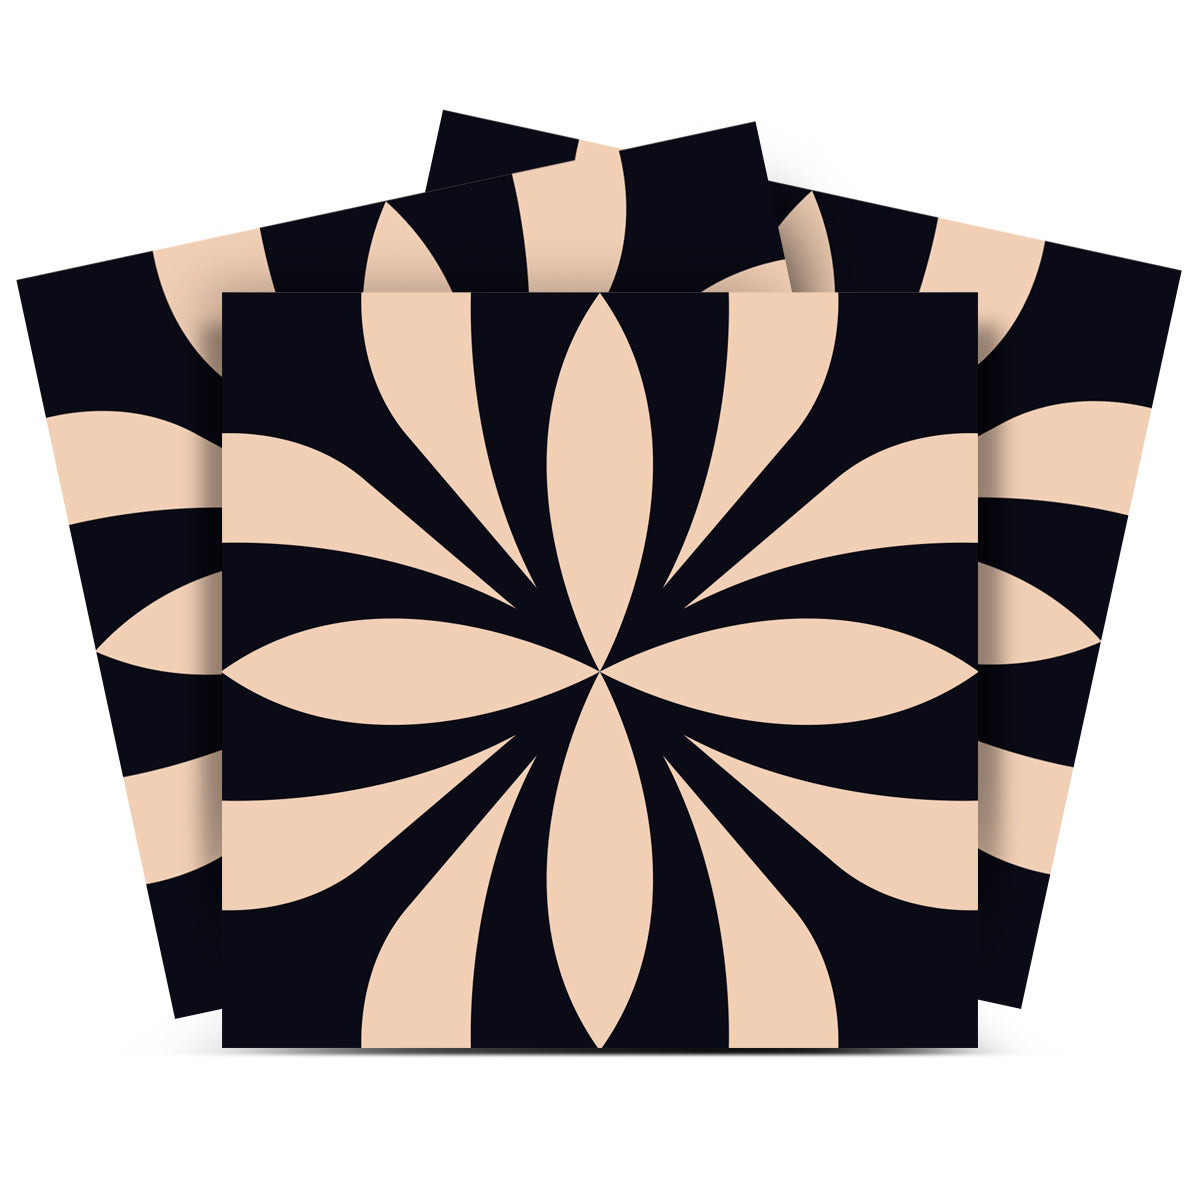 5" X 5" Intertwined Black And Cream Peel And Stick Removable Tiles-390769-1